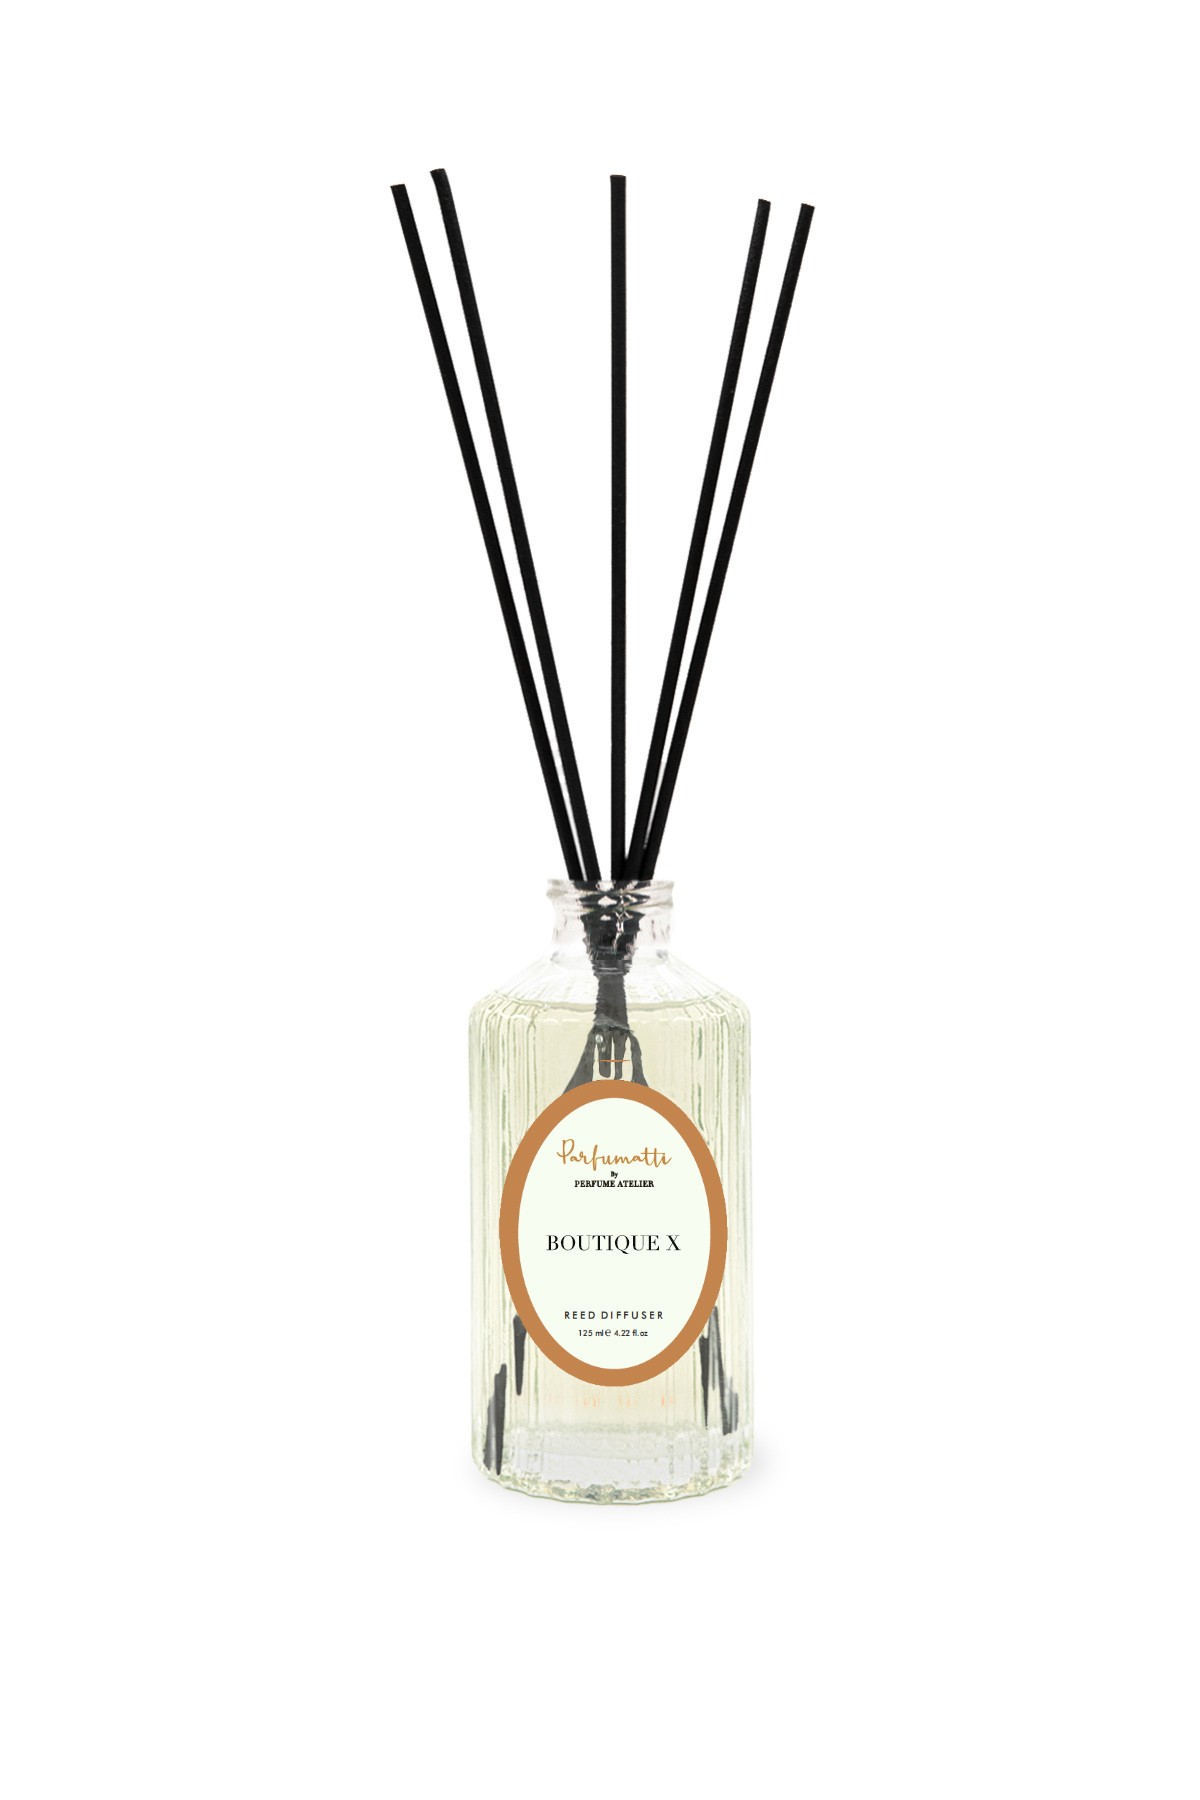 BOUTIQUE X 125 Ml Reed Diffuser main variant image